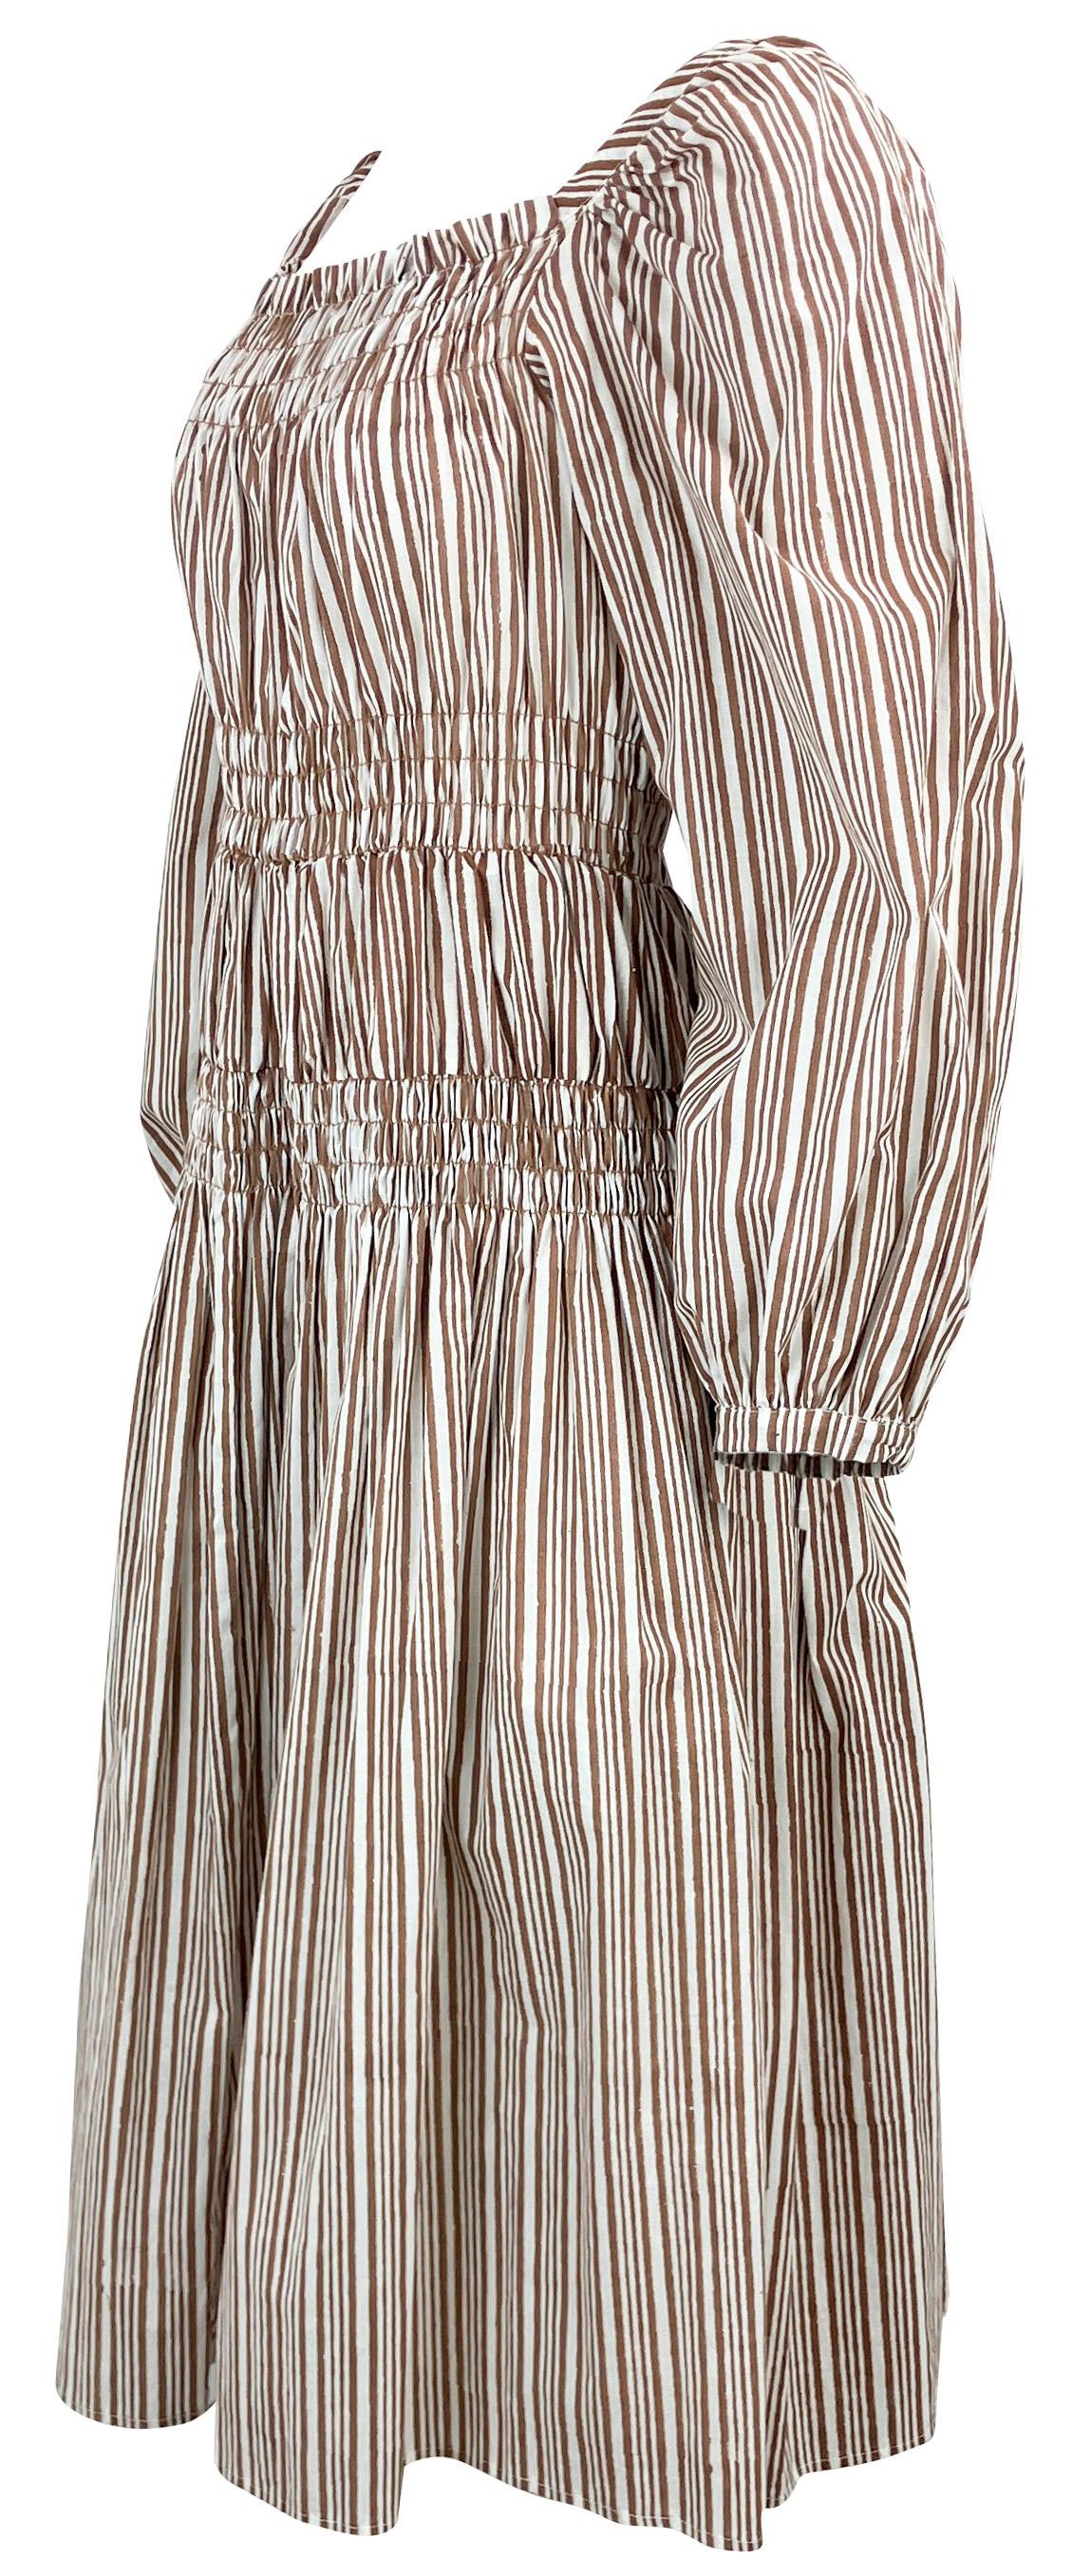 Ciao Lucia! Long Sleeve Midi Dress in White and Brown Stripe - Discounts on Ciao Lucia! at UAL